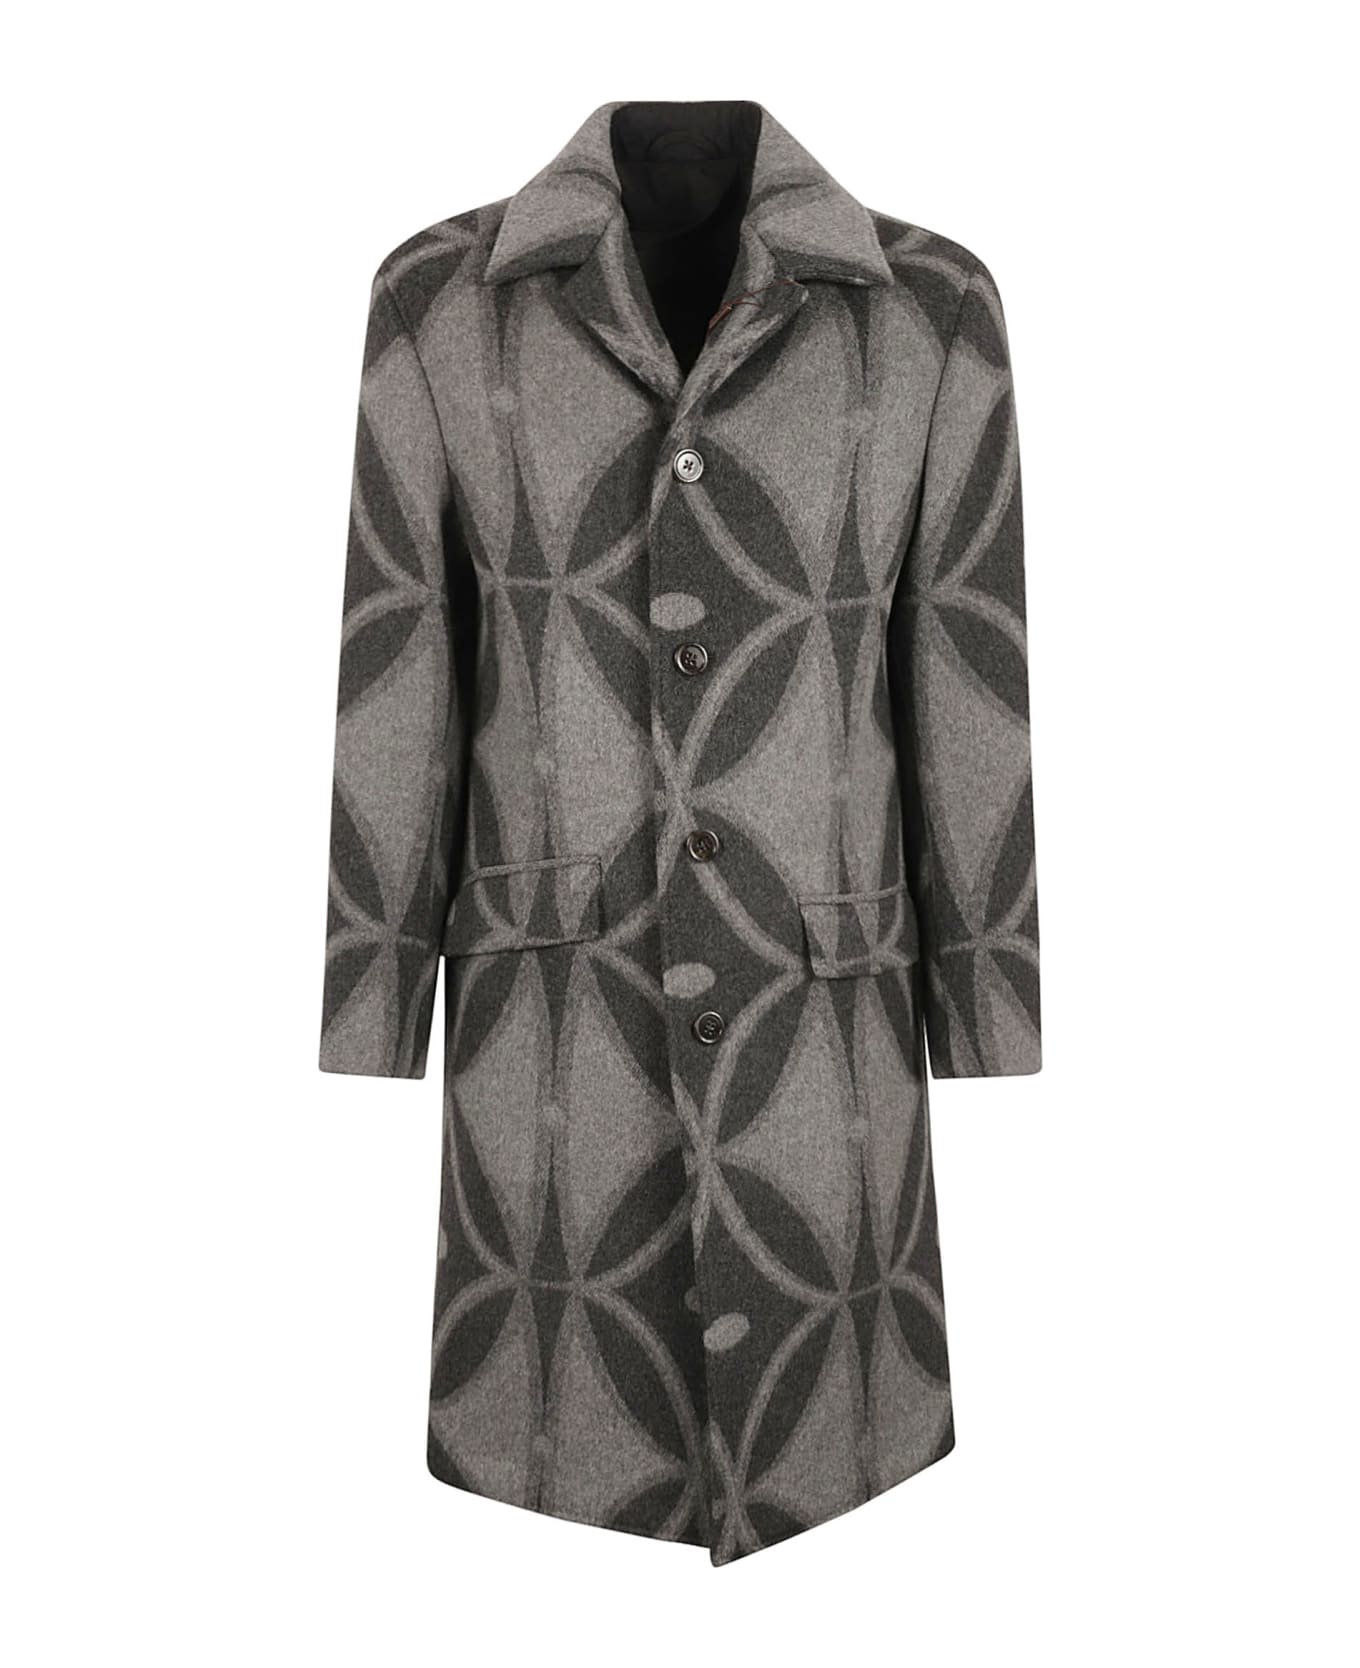 Etro Patterned Button-up Coat - Gray